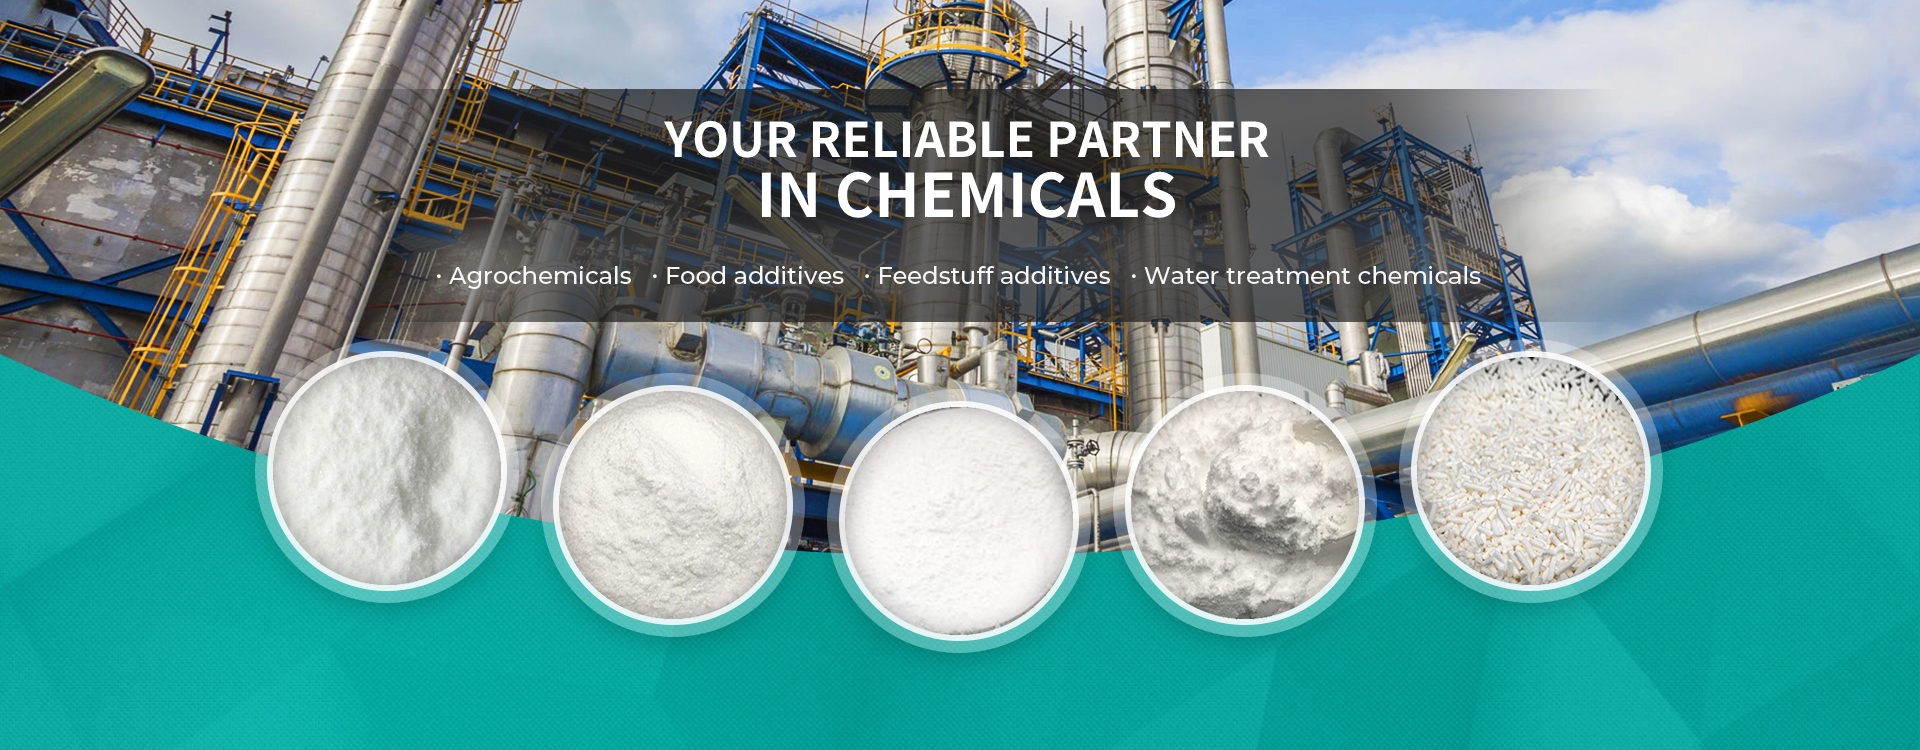 your reliable partner in chemicals